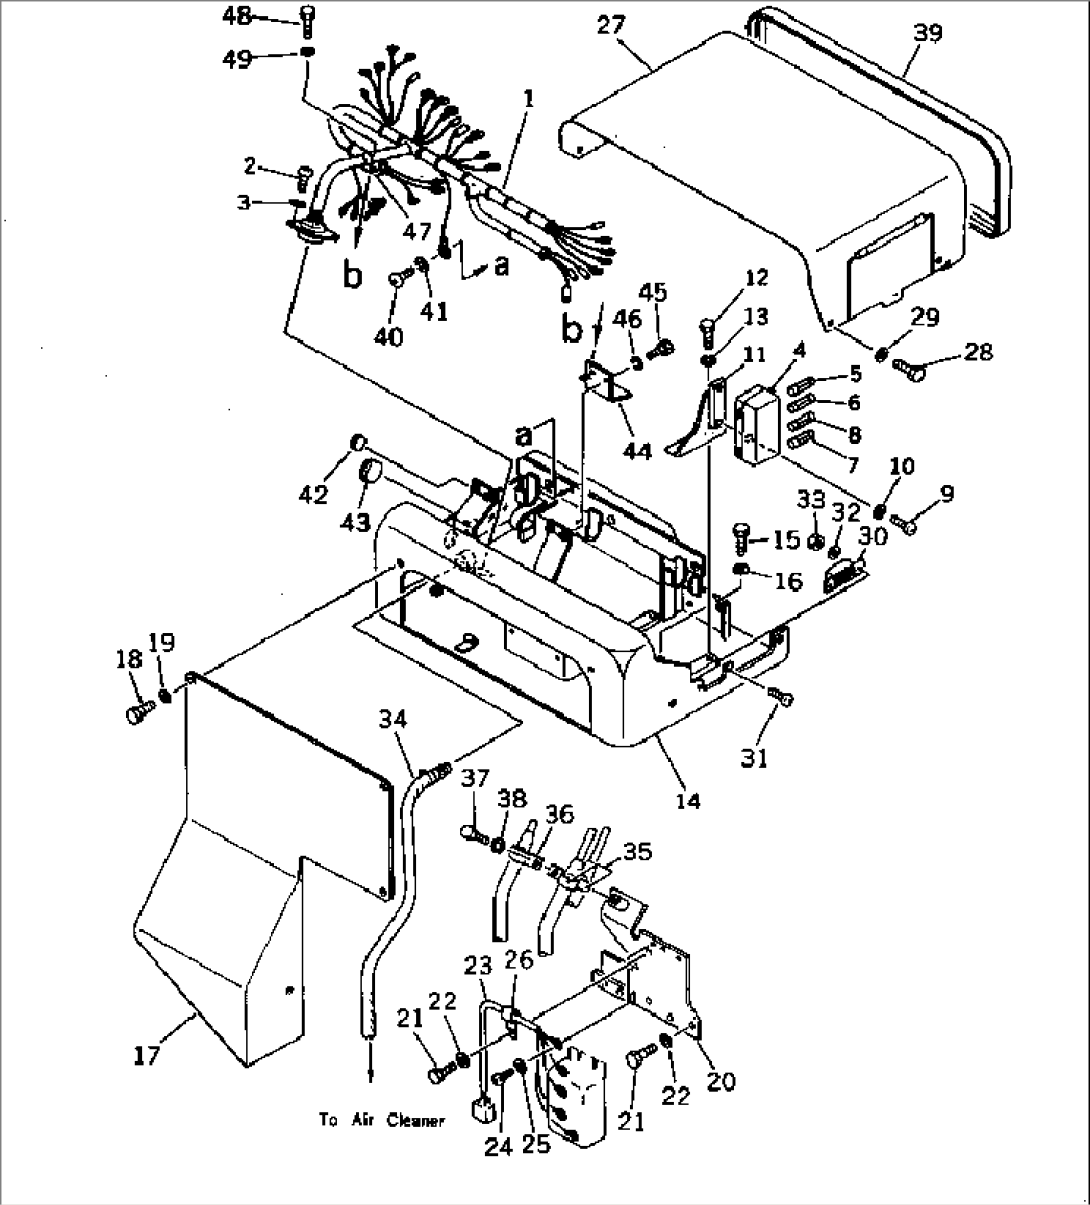 ELECTRICAL SYSTEM (3/3) (FOR ROCKET HEATER)(#12626-)